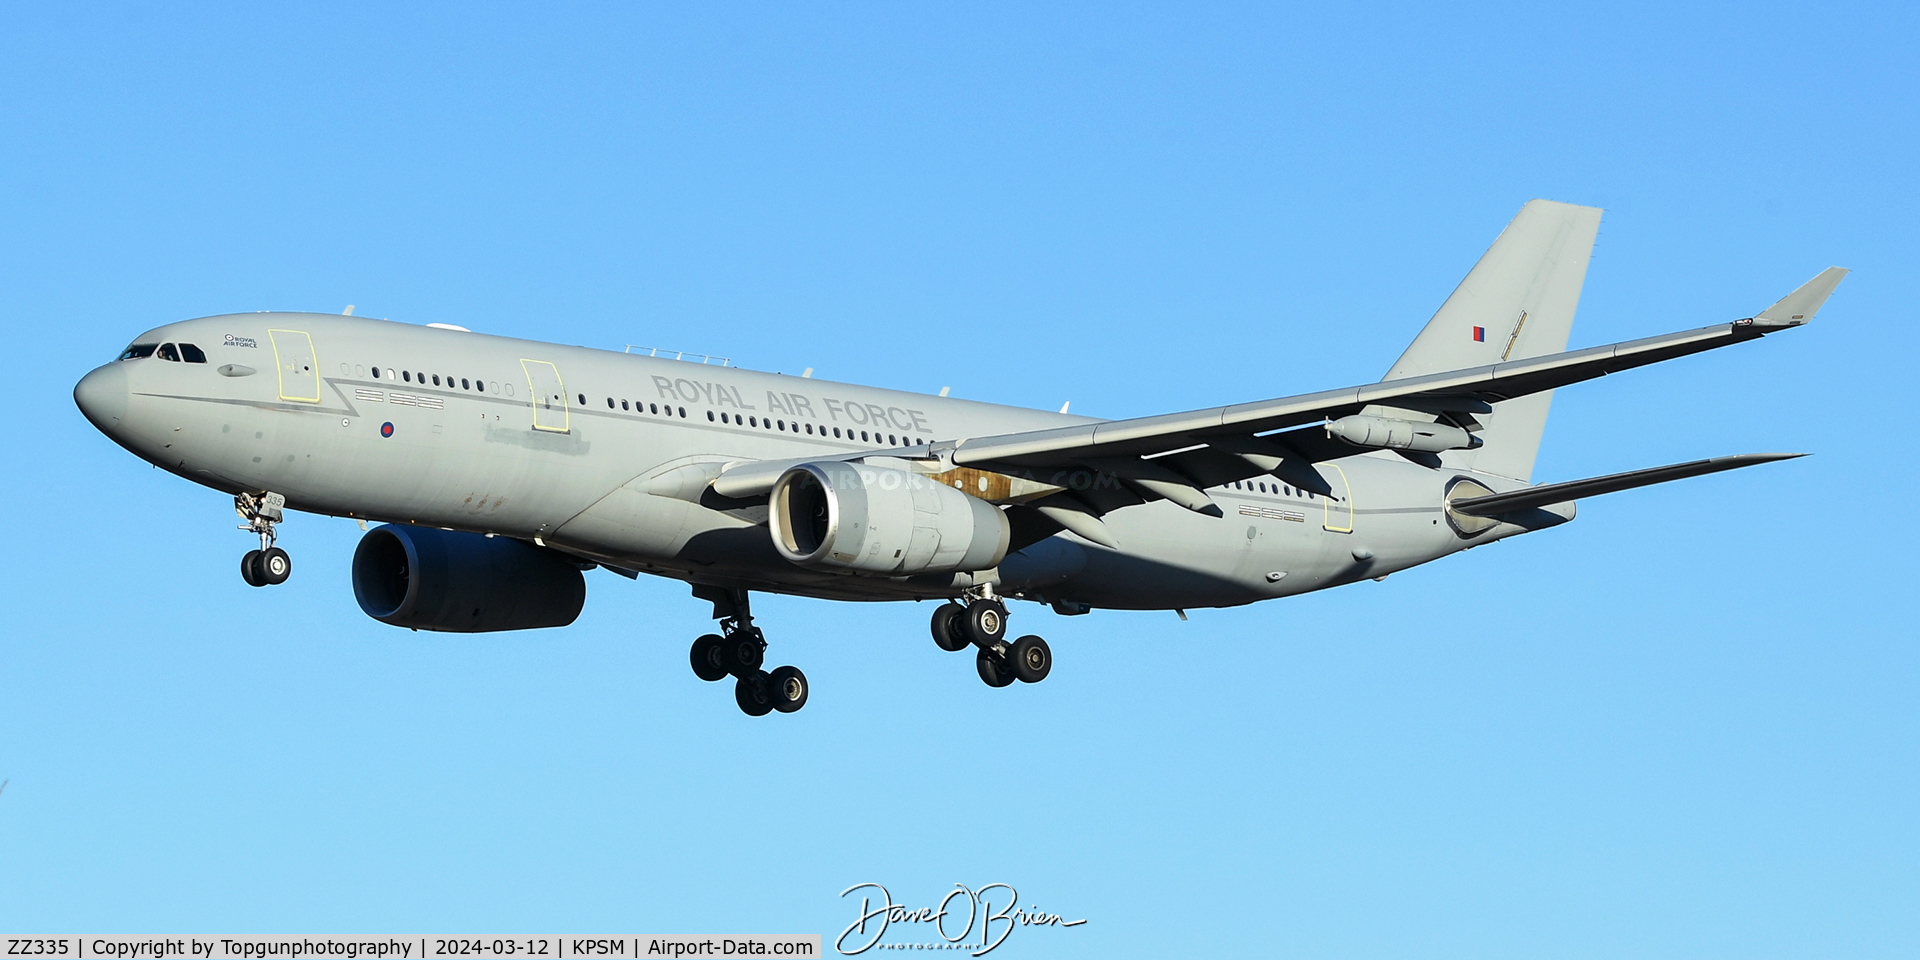 ZZ335, 2012 Airbus KC2 Voyager (A330-243MRTT) C/N 1334, ASCOT9240 following up her 2 chics